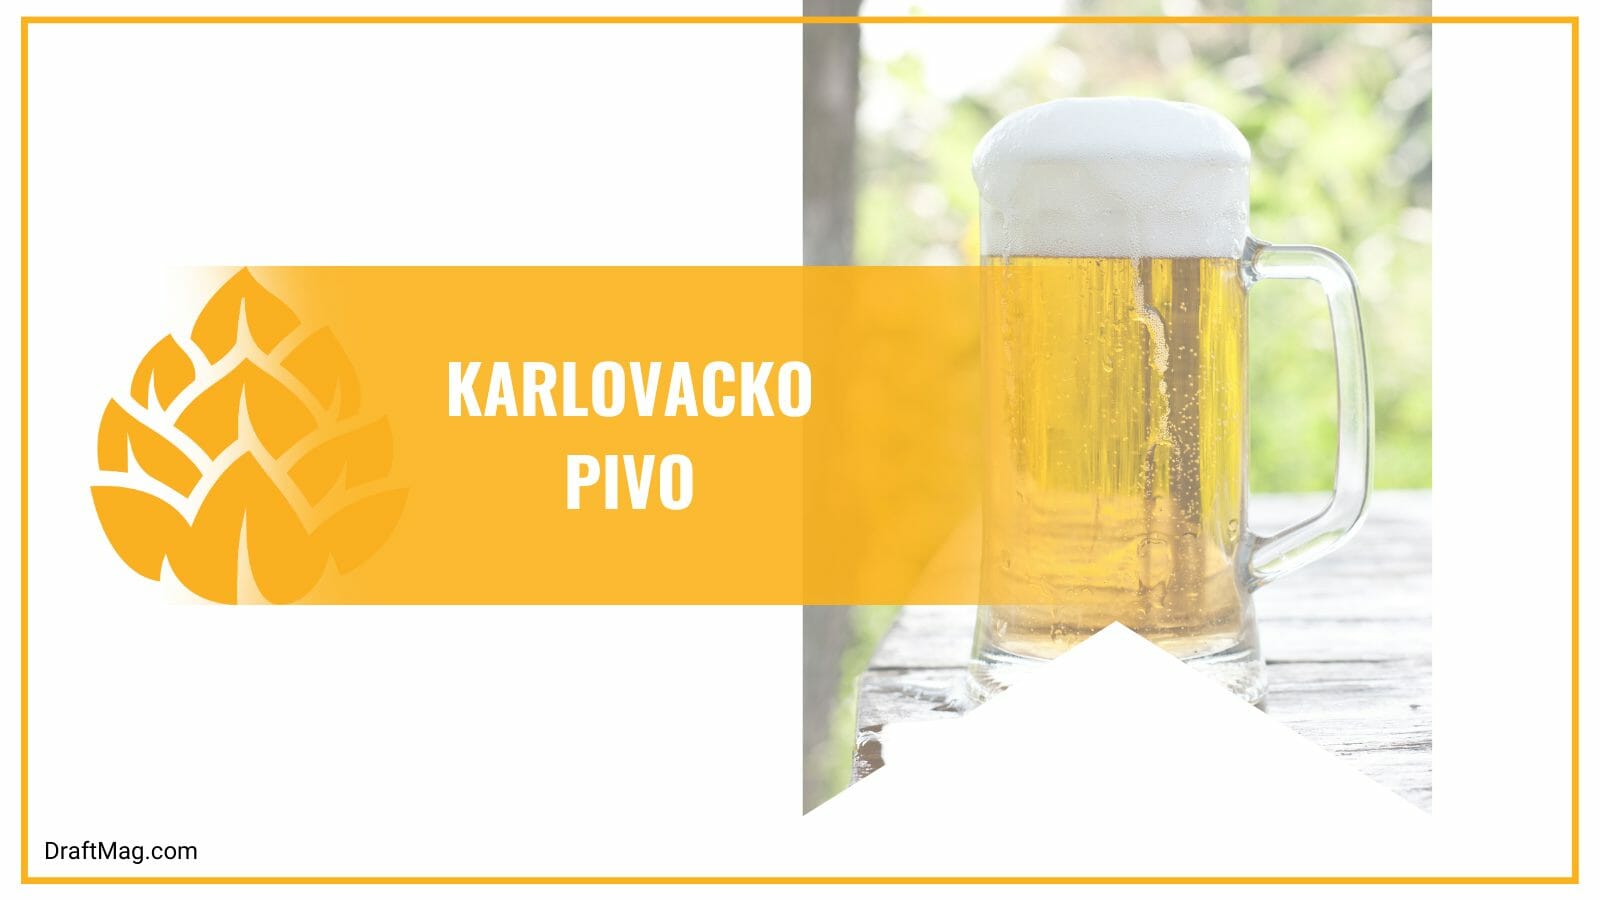 Karlovacko pivo with candy notes